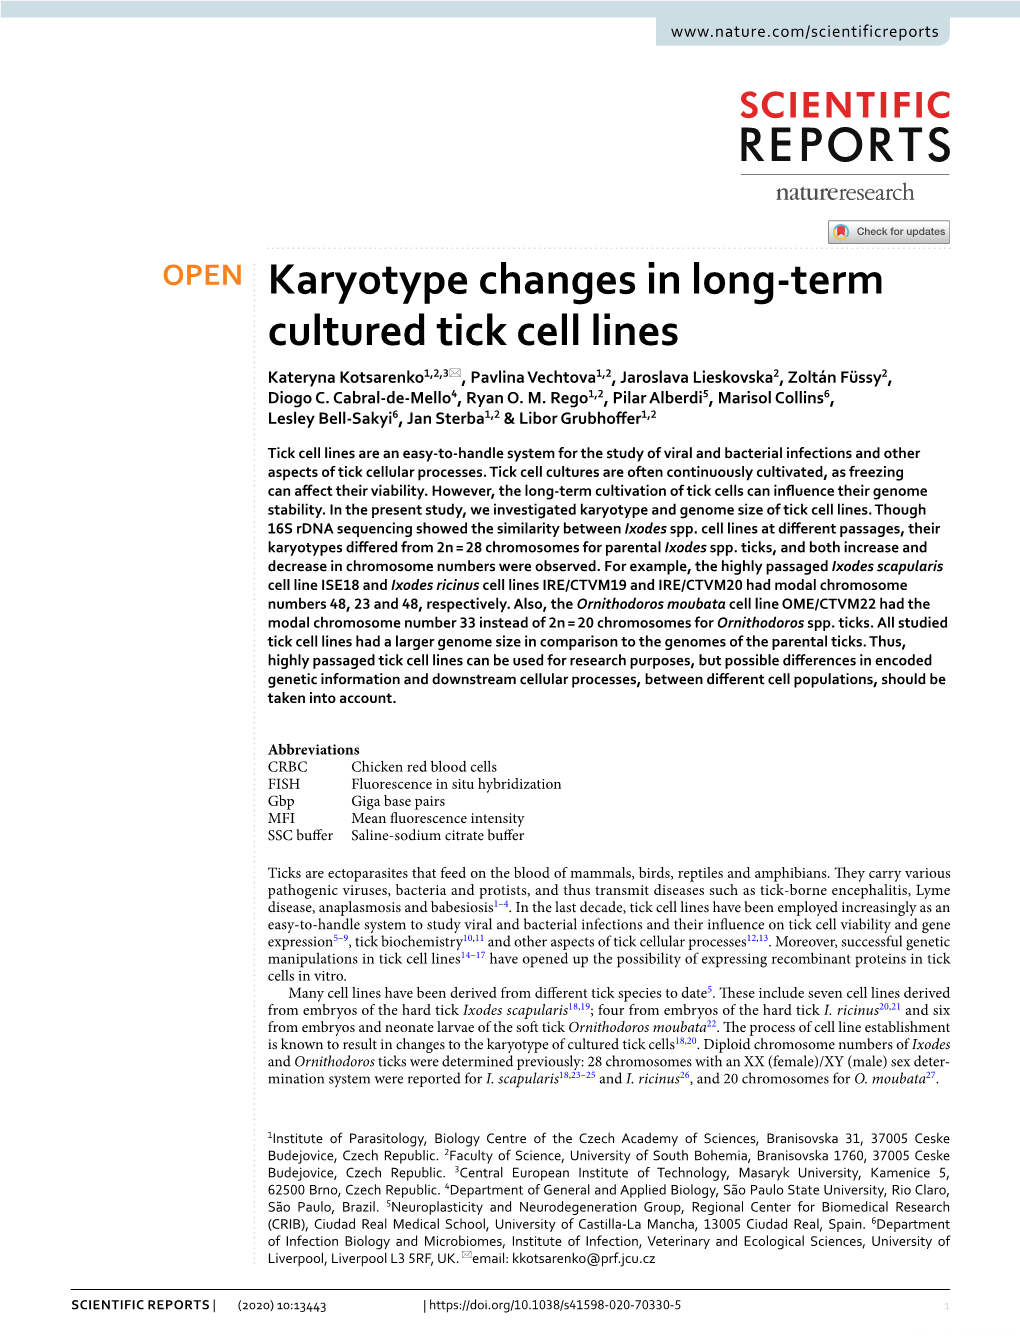 Karyotype Changes in Long-Term Cultured Tick Cell Lines